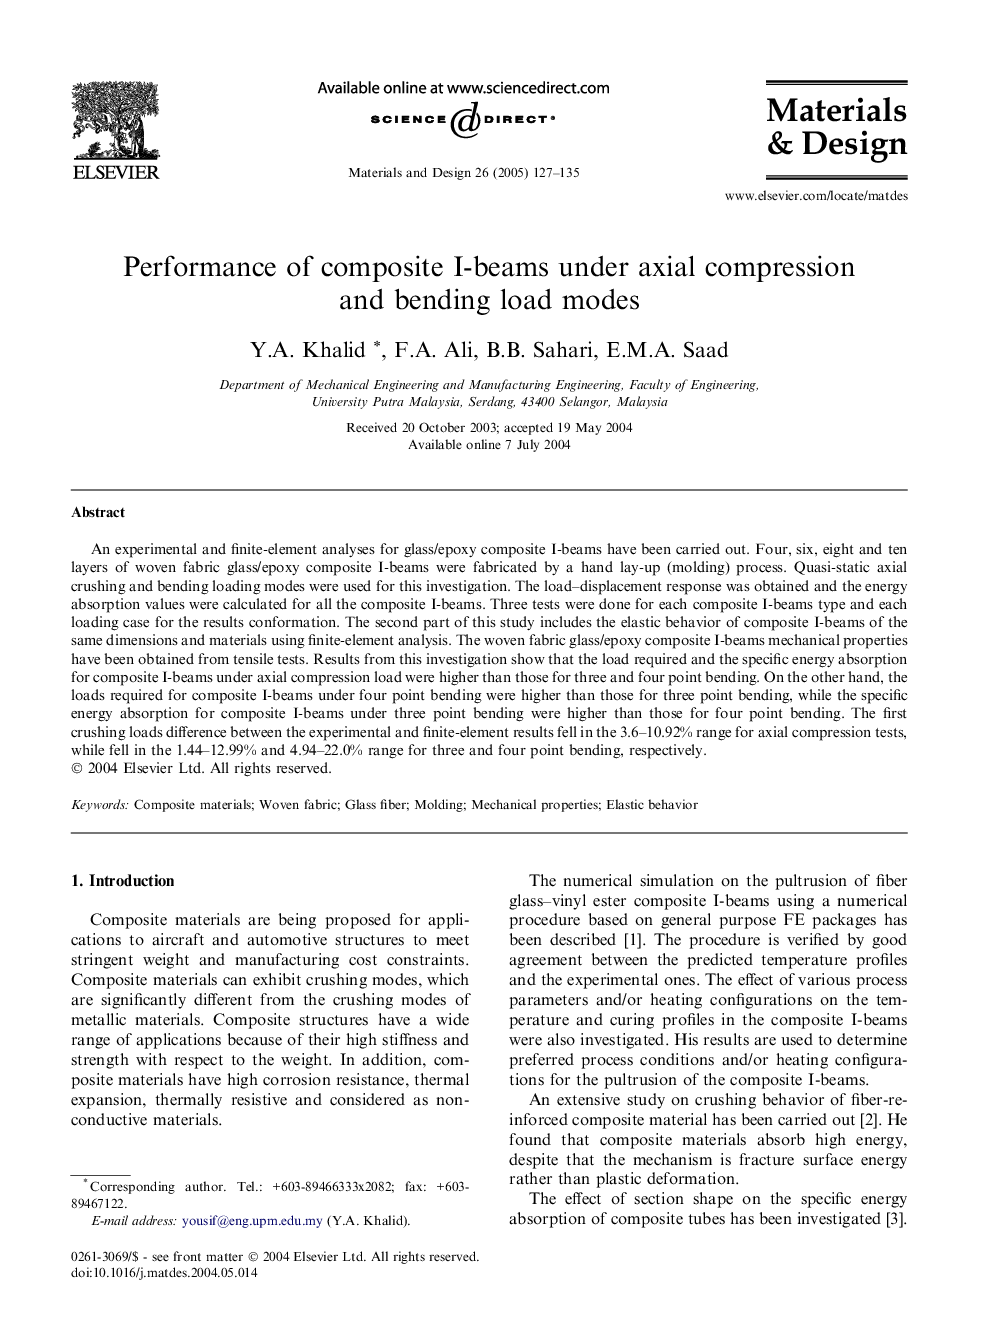 Performance of composite I-beams under axial compression and bending load modes